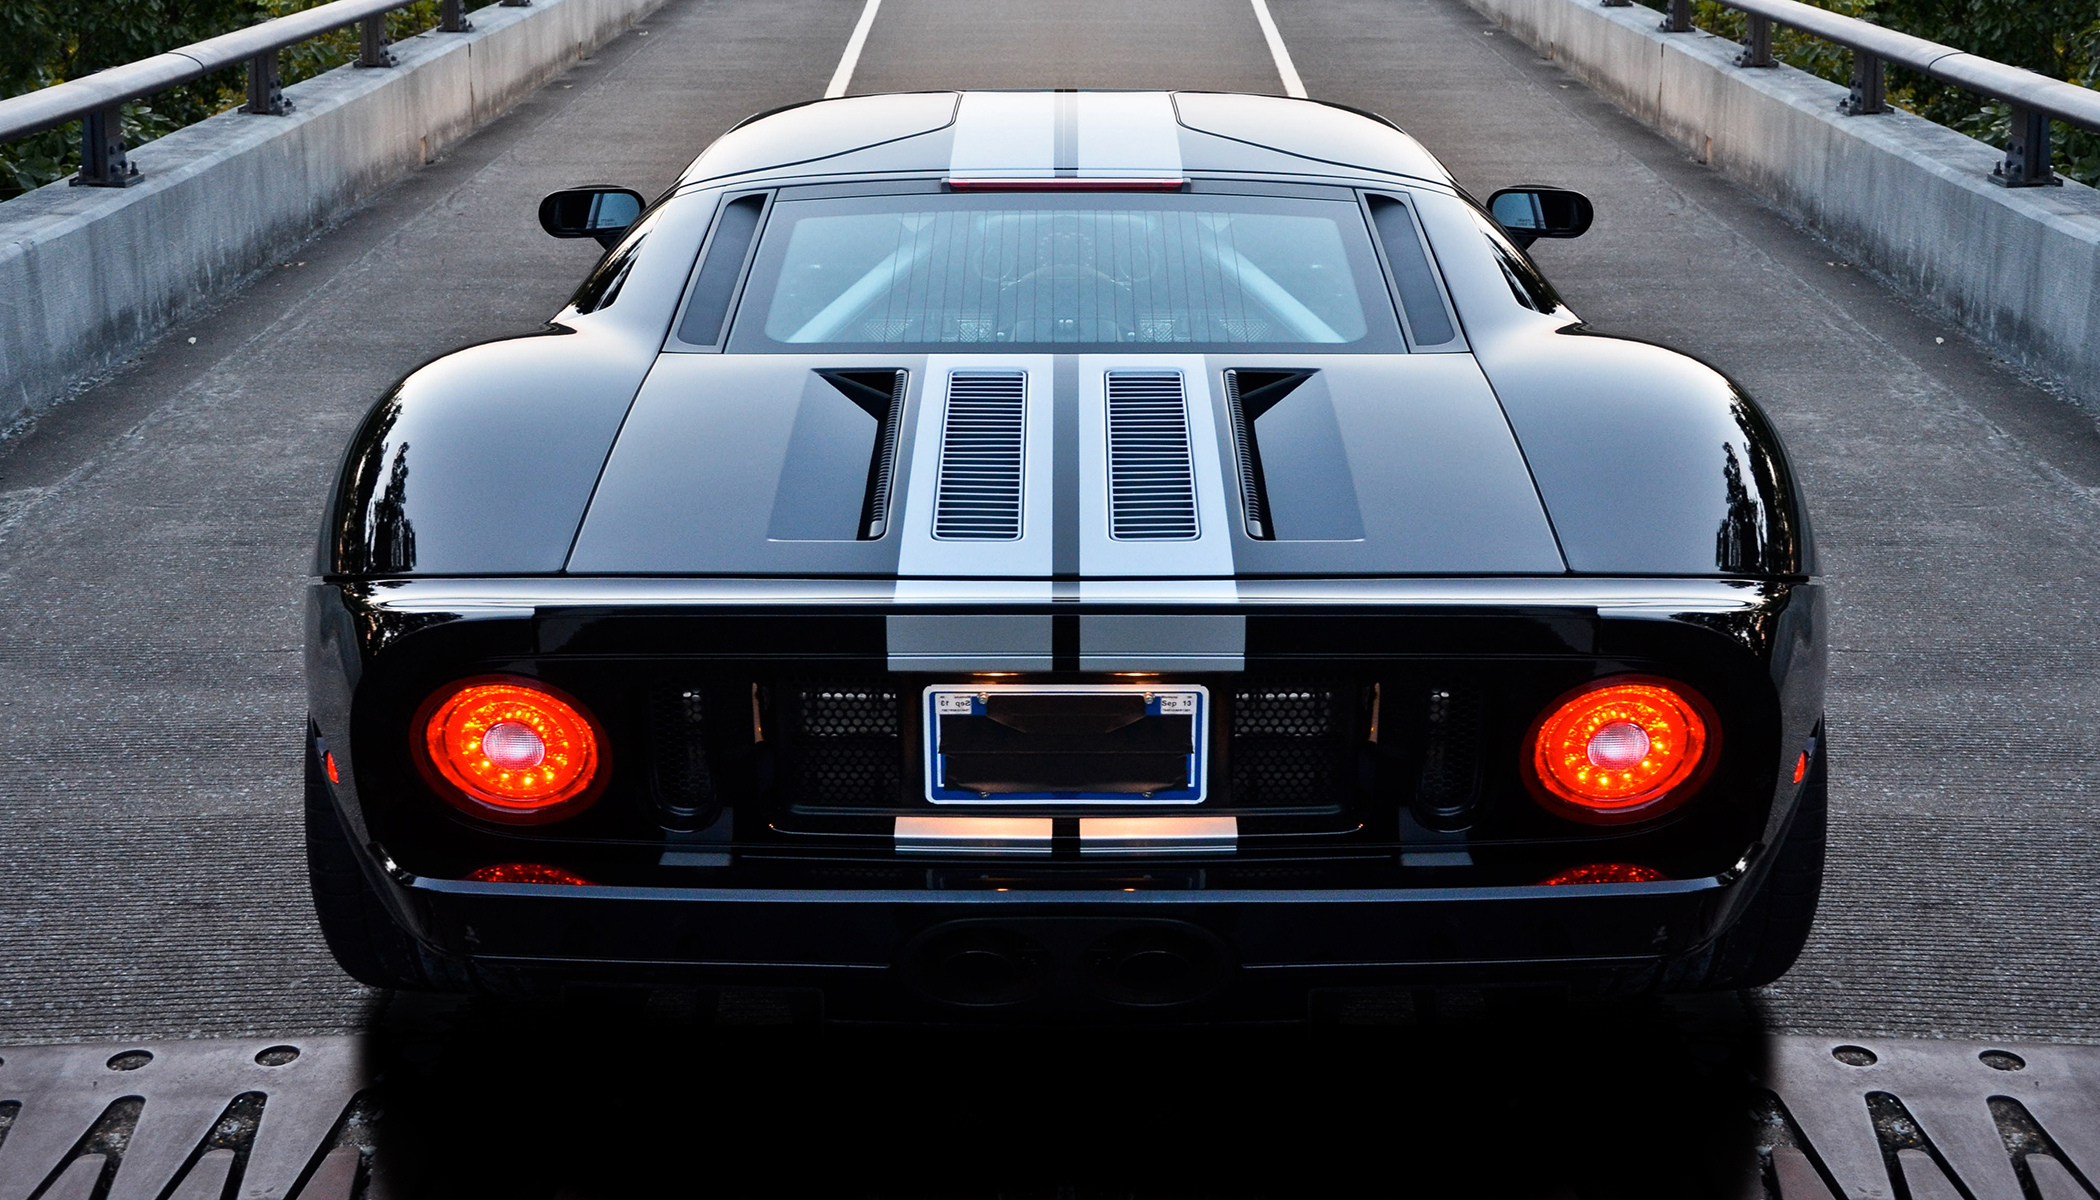 New Lock Screen Wallpapers cars, auto, ford, black, back view, rear view